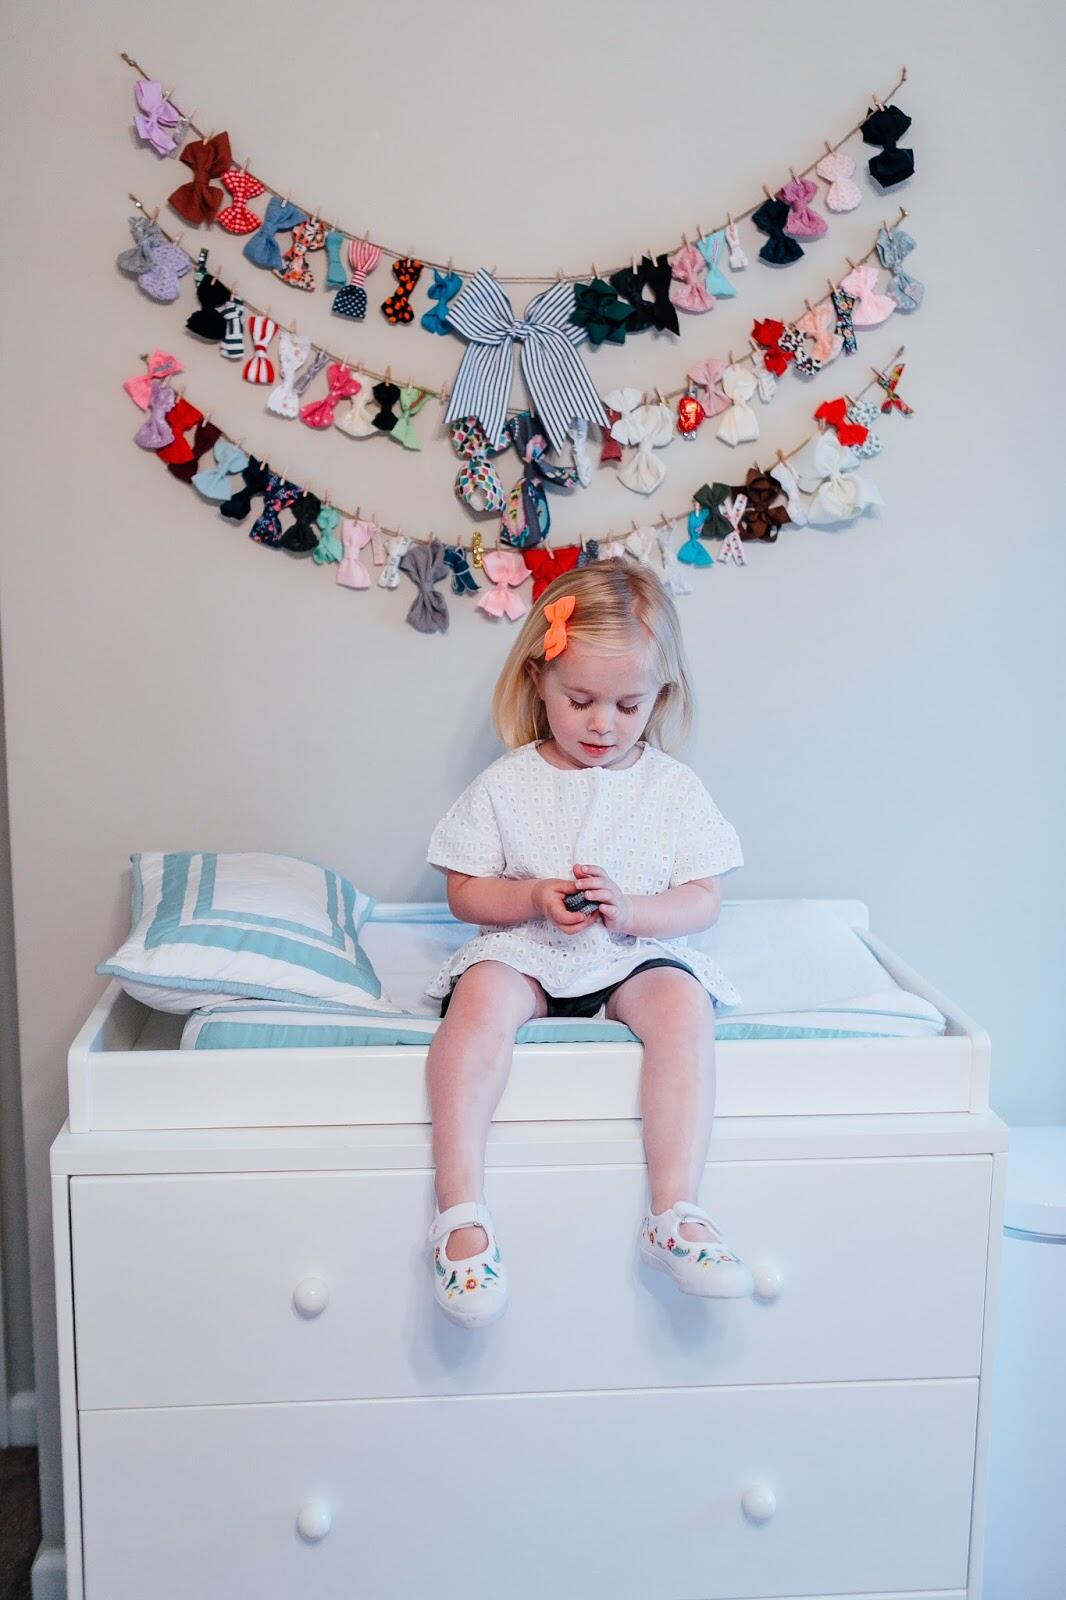 How to Choose a Rug for Your Child's Room by lifestyle blogger Laura of Walking in Memphis in High Heels